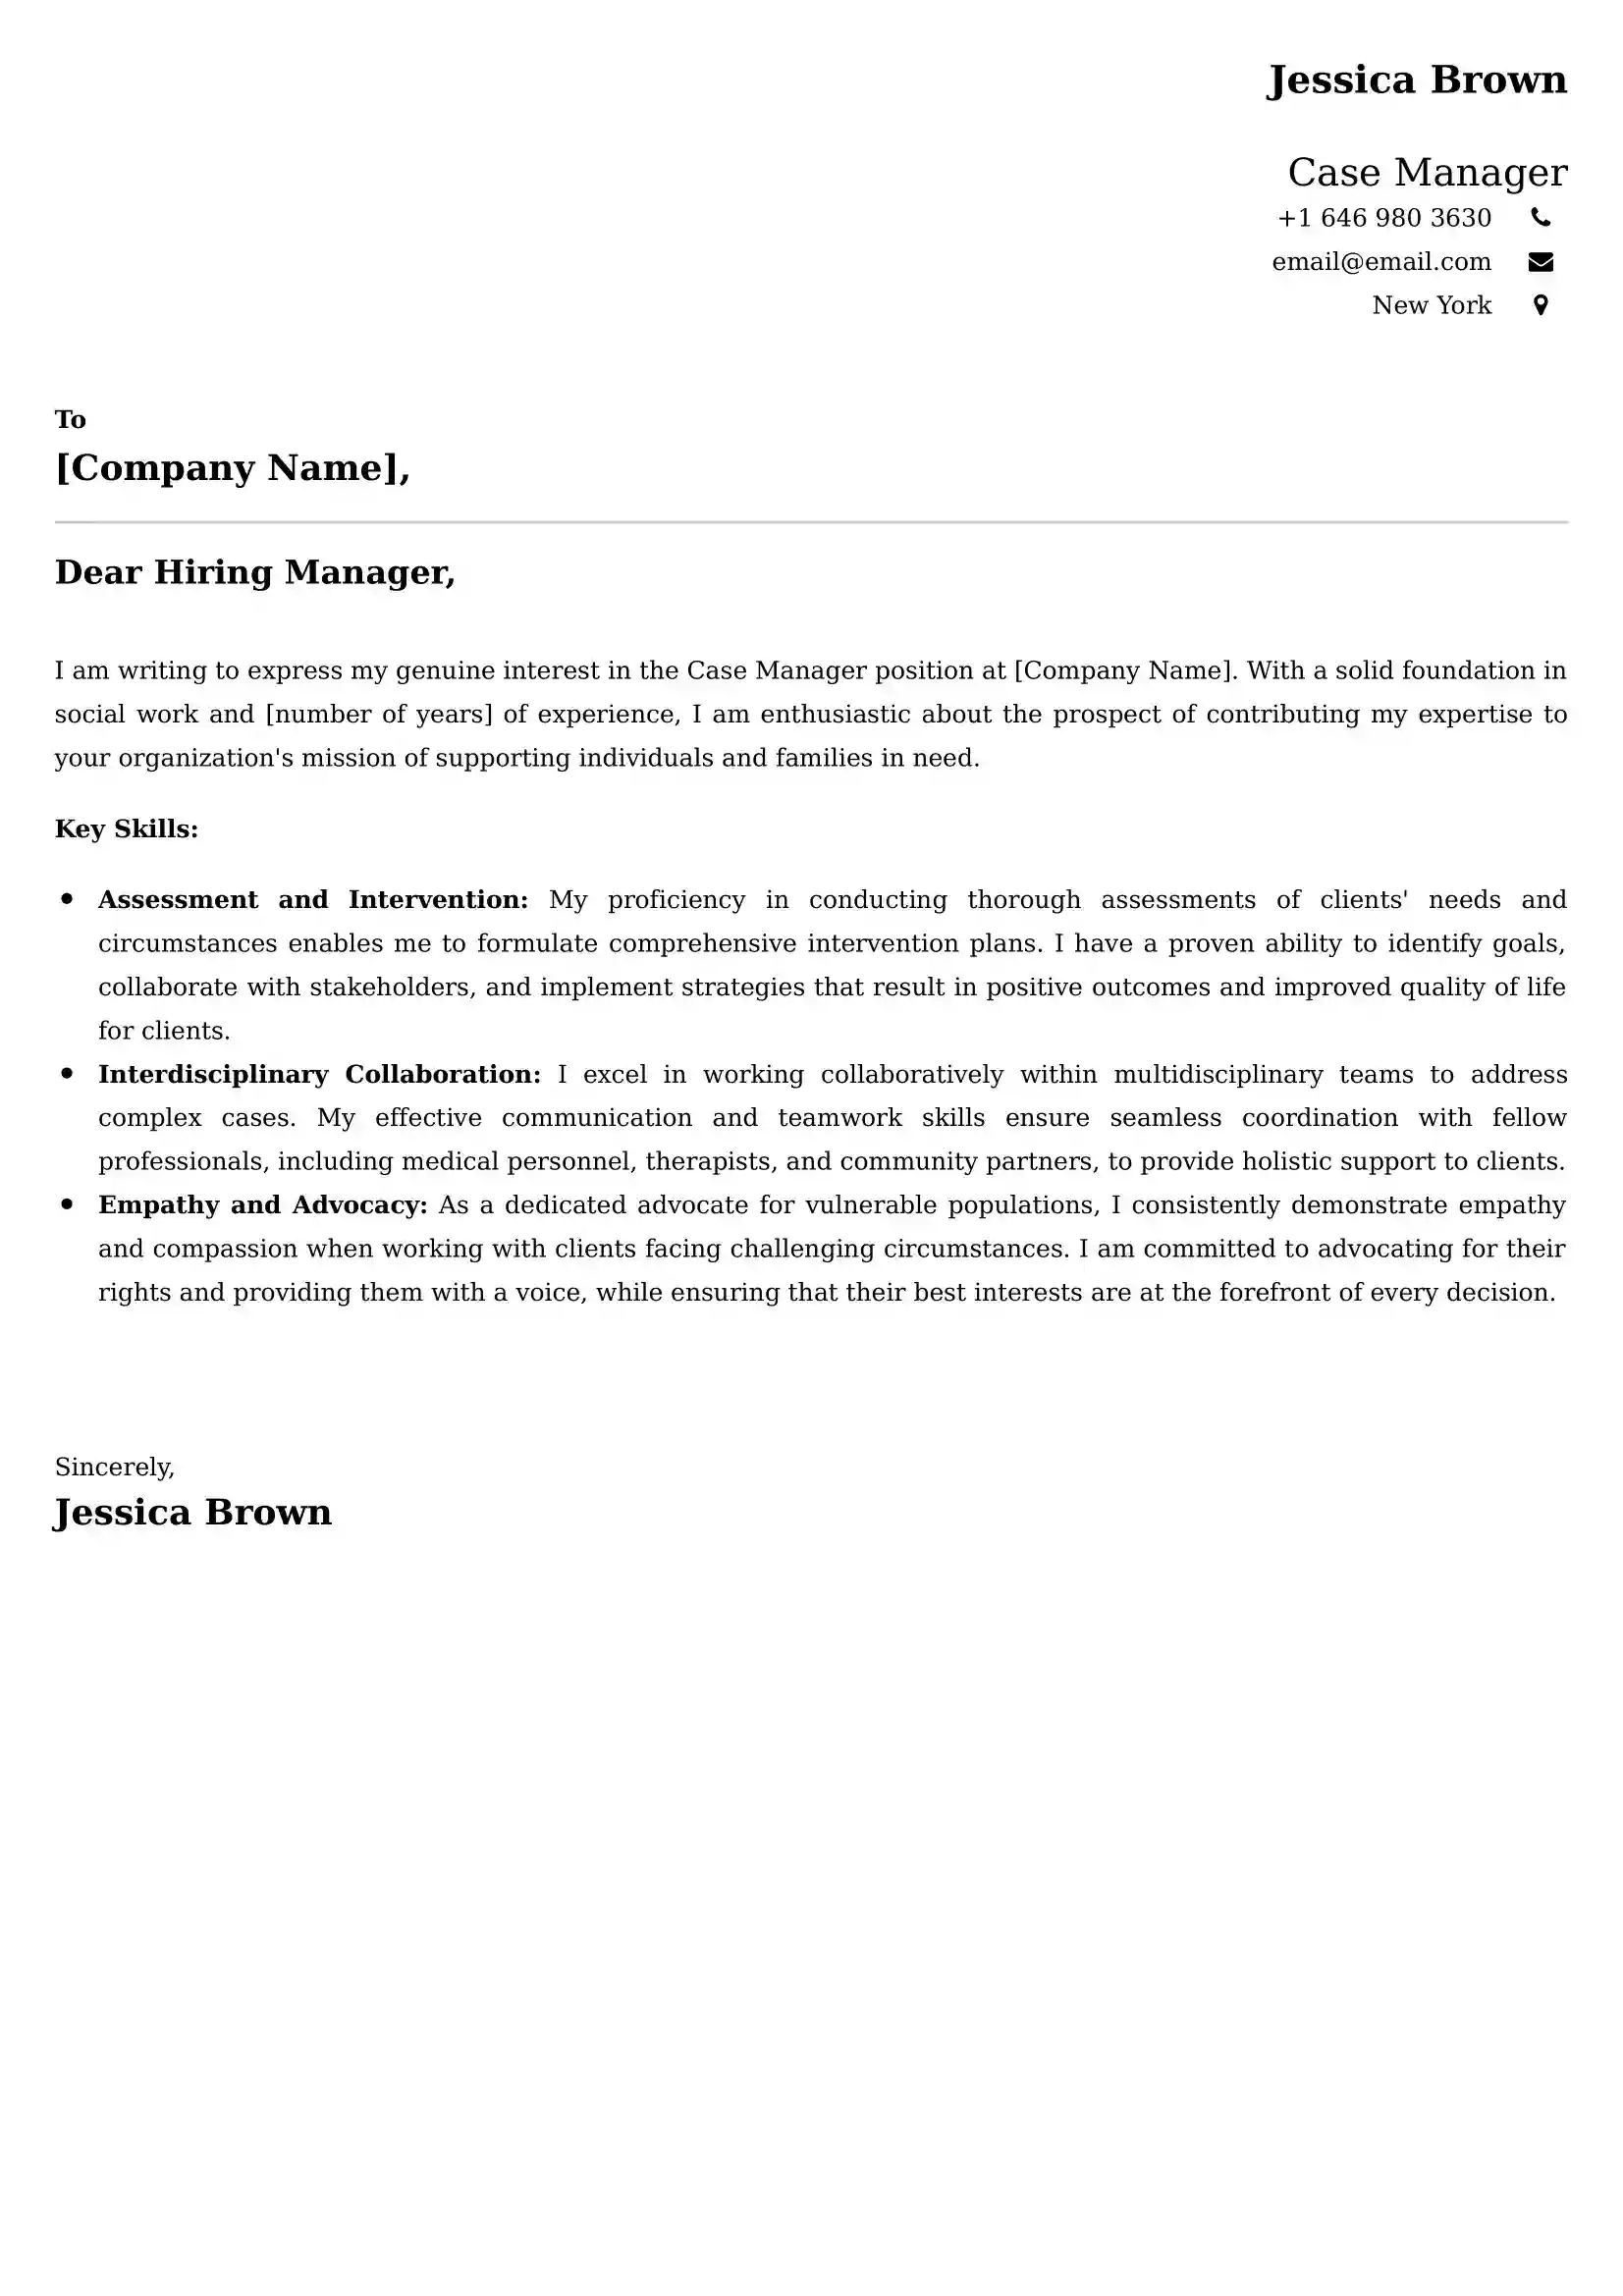 Case Manager Cover Letter Examples -Latest Brazilian Templates